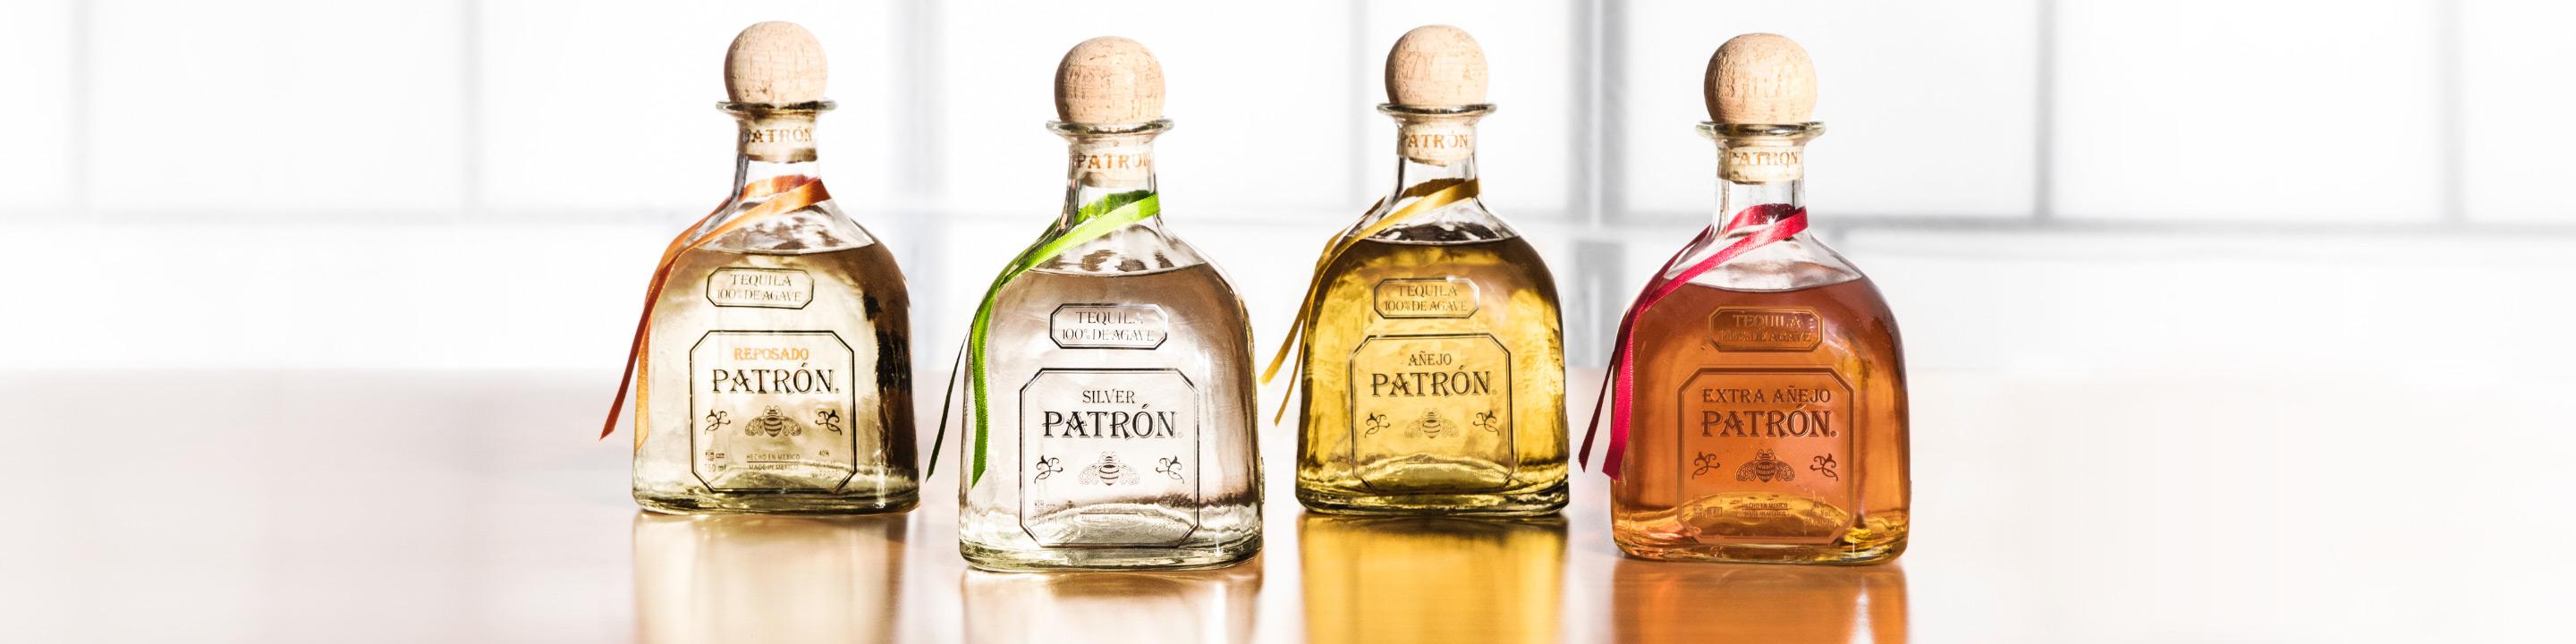 The world’s first ultra-premium tequila, PATRÓN tequila is made using a handcrafted, time-honored distillation process and only the best 100% Weber Blue Agave. This results in the perfect balance of fresh agave flavor with baked agave undertones. To top it off, PATRÓN is made with 0% additives and never uses Glycerin, Caramel coloring, Oak Extract or Jarabe, a sugar-based syrup, in our tequila. We have achieved a smooth, delicious taste profile and complex flavor without the use of additives from the very beginning and believe our community deserves to know what they are enjoying in every glass of PATRÓN tequila. Buy Patron online now from nearby liquor stores via Minibar Delivery.